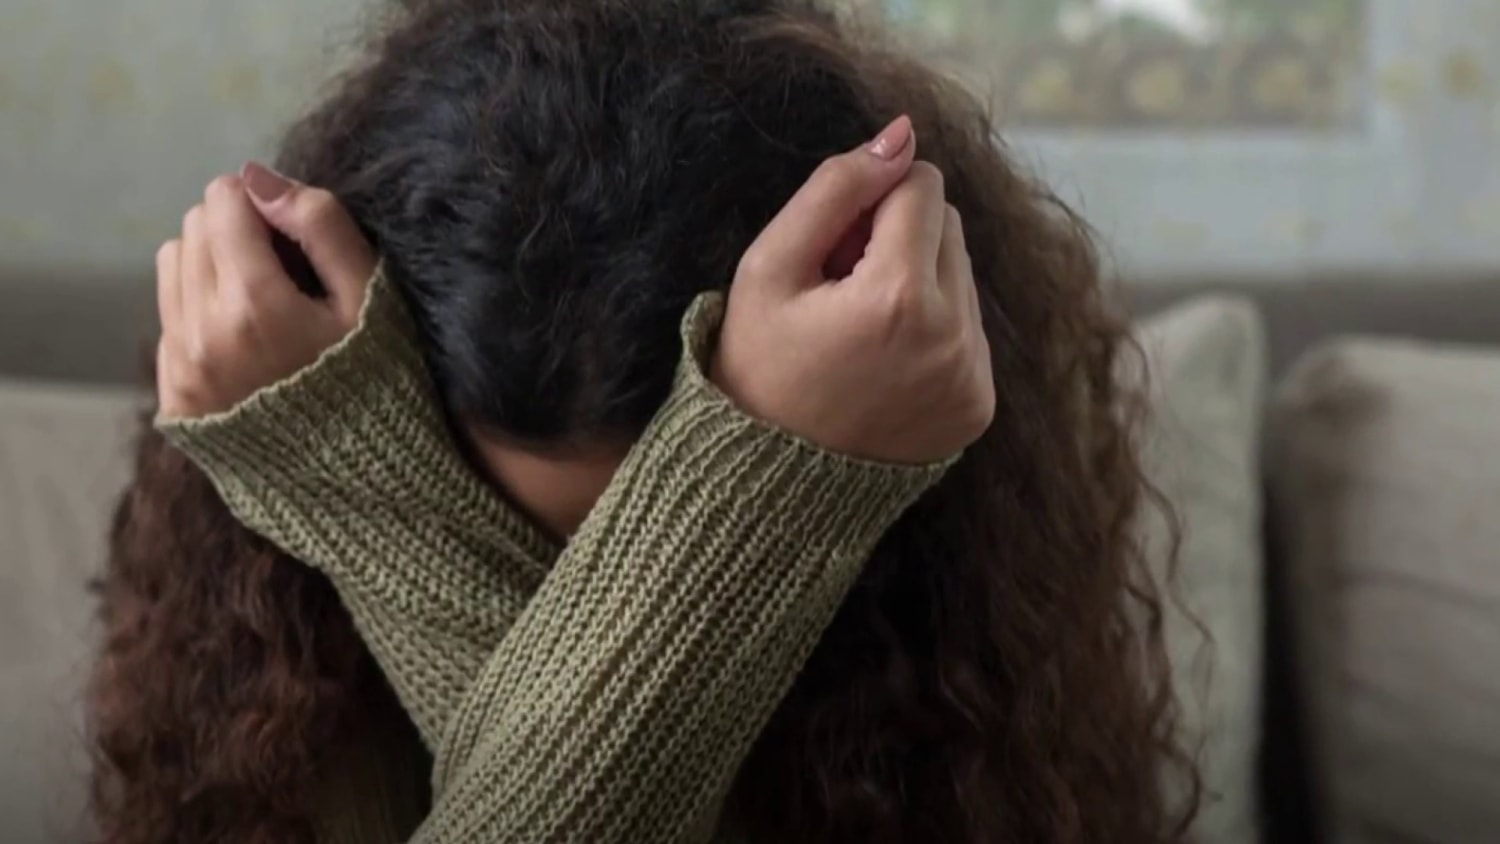 Teen mental health: CDC says girls report extreme sadness, violence